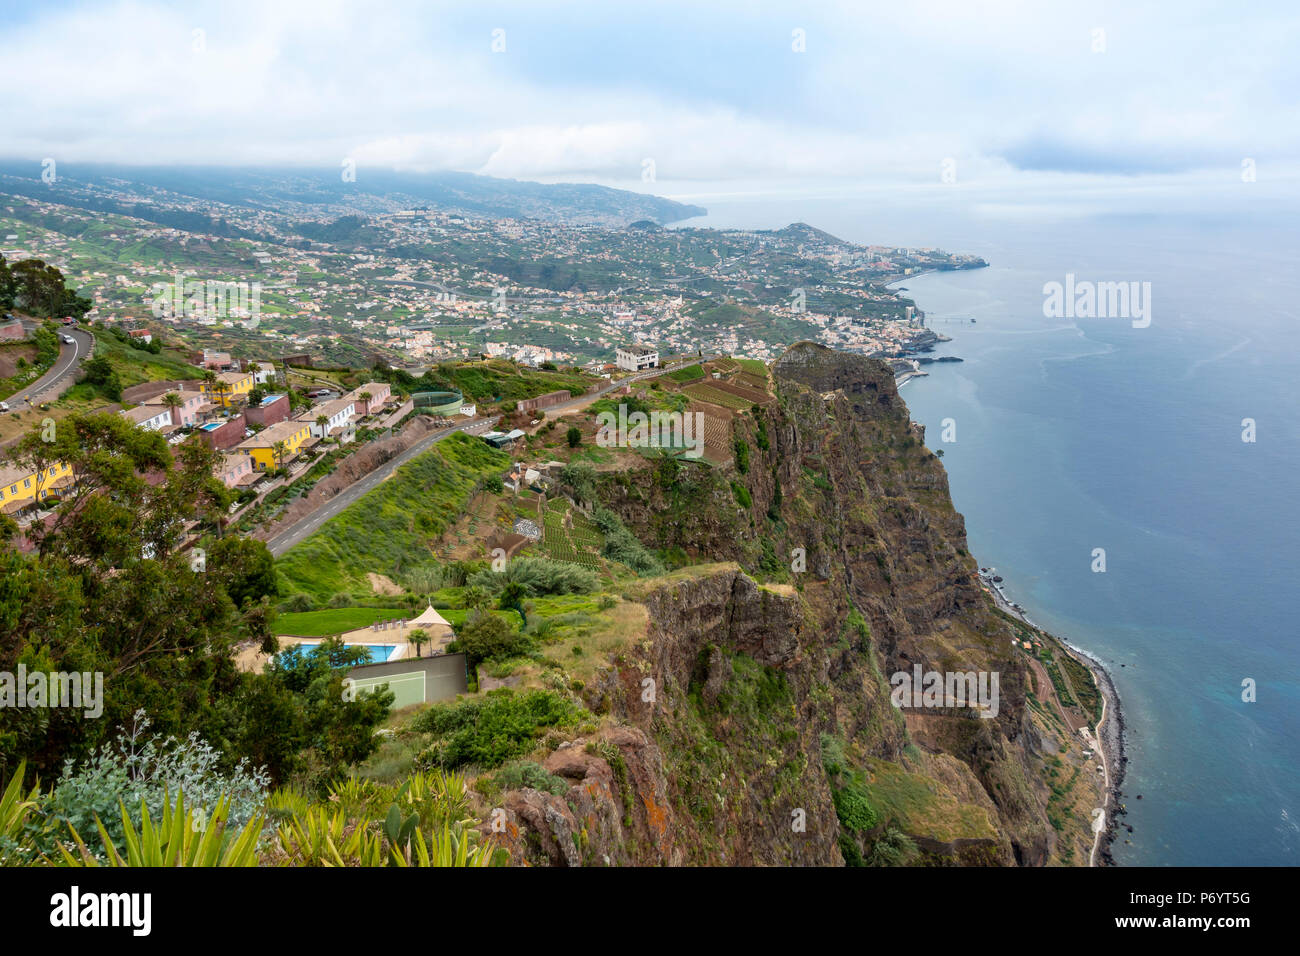 View from Cabo Girao Skywalk looking towards Funchal in Madeira Stock Photo